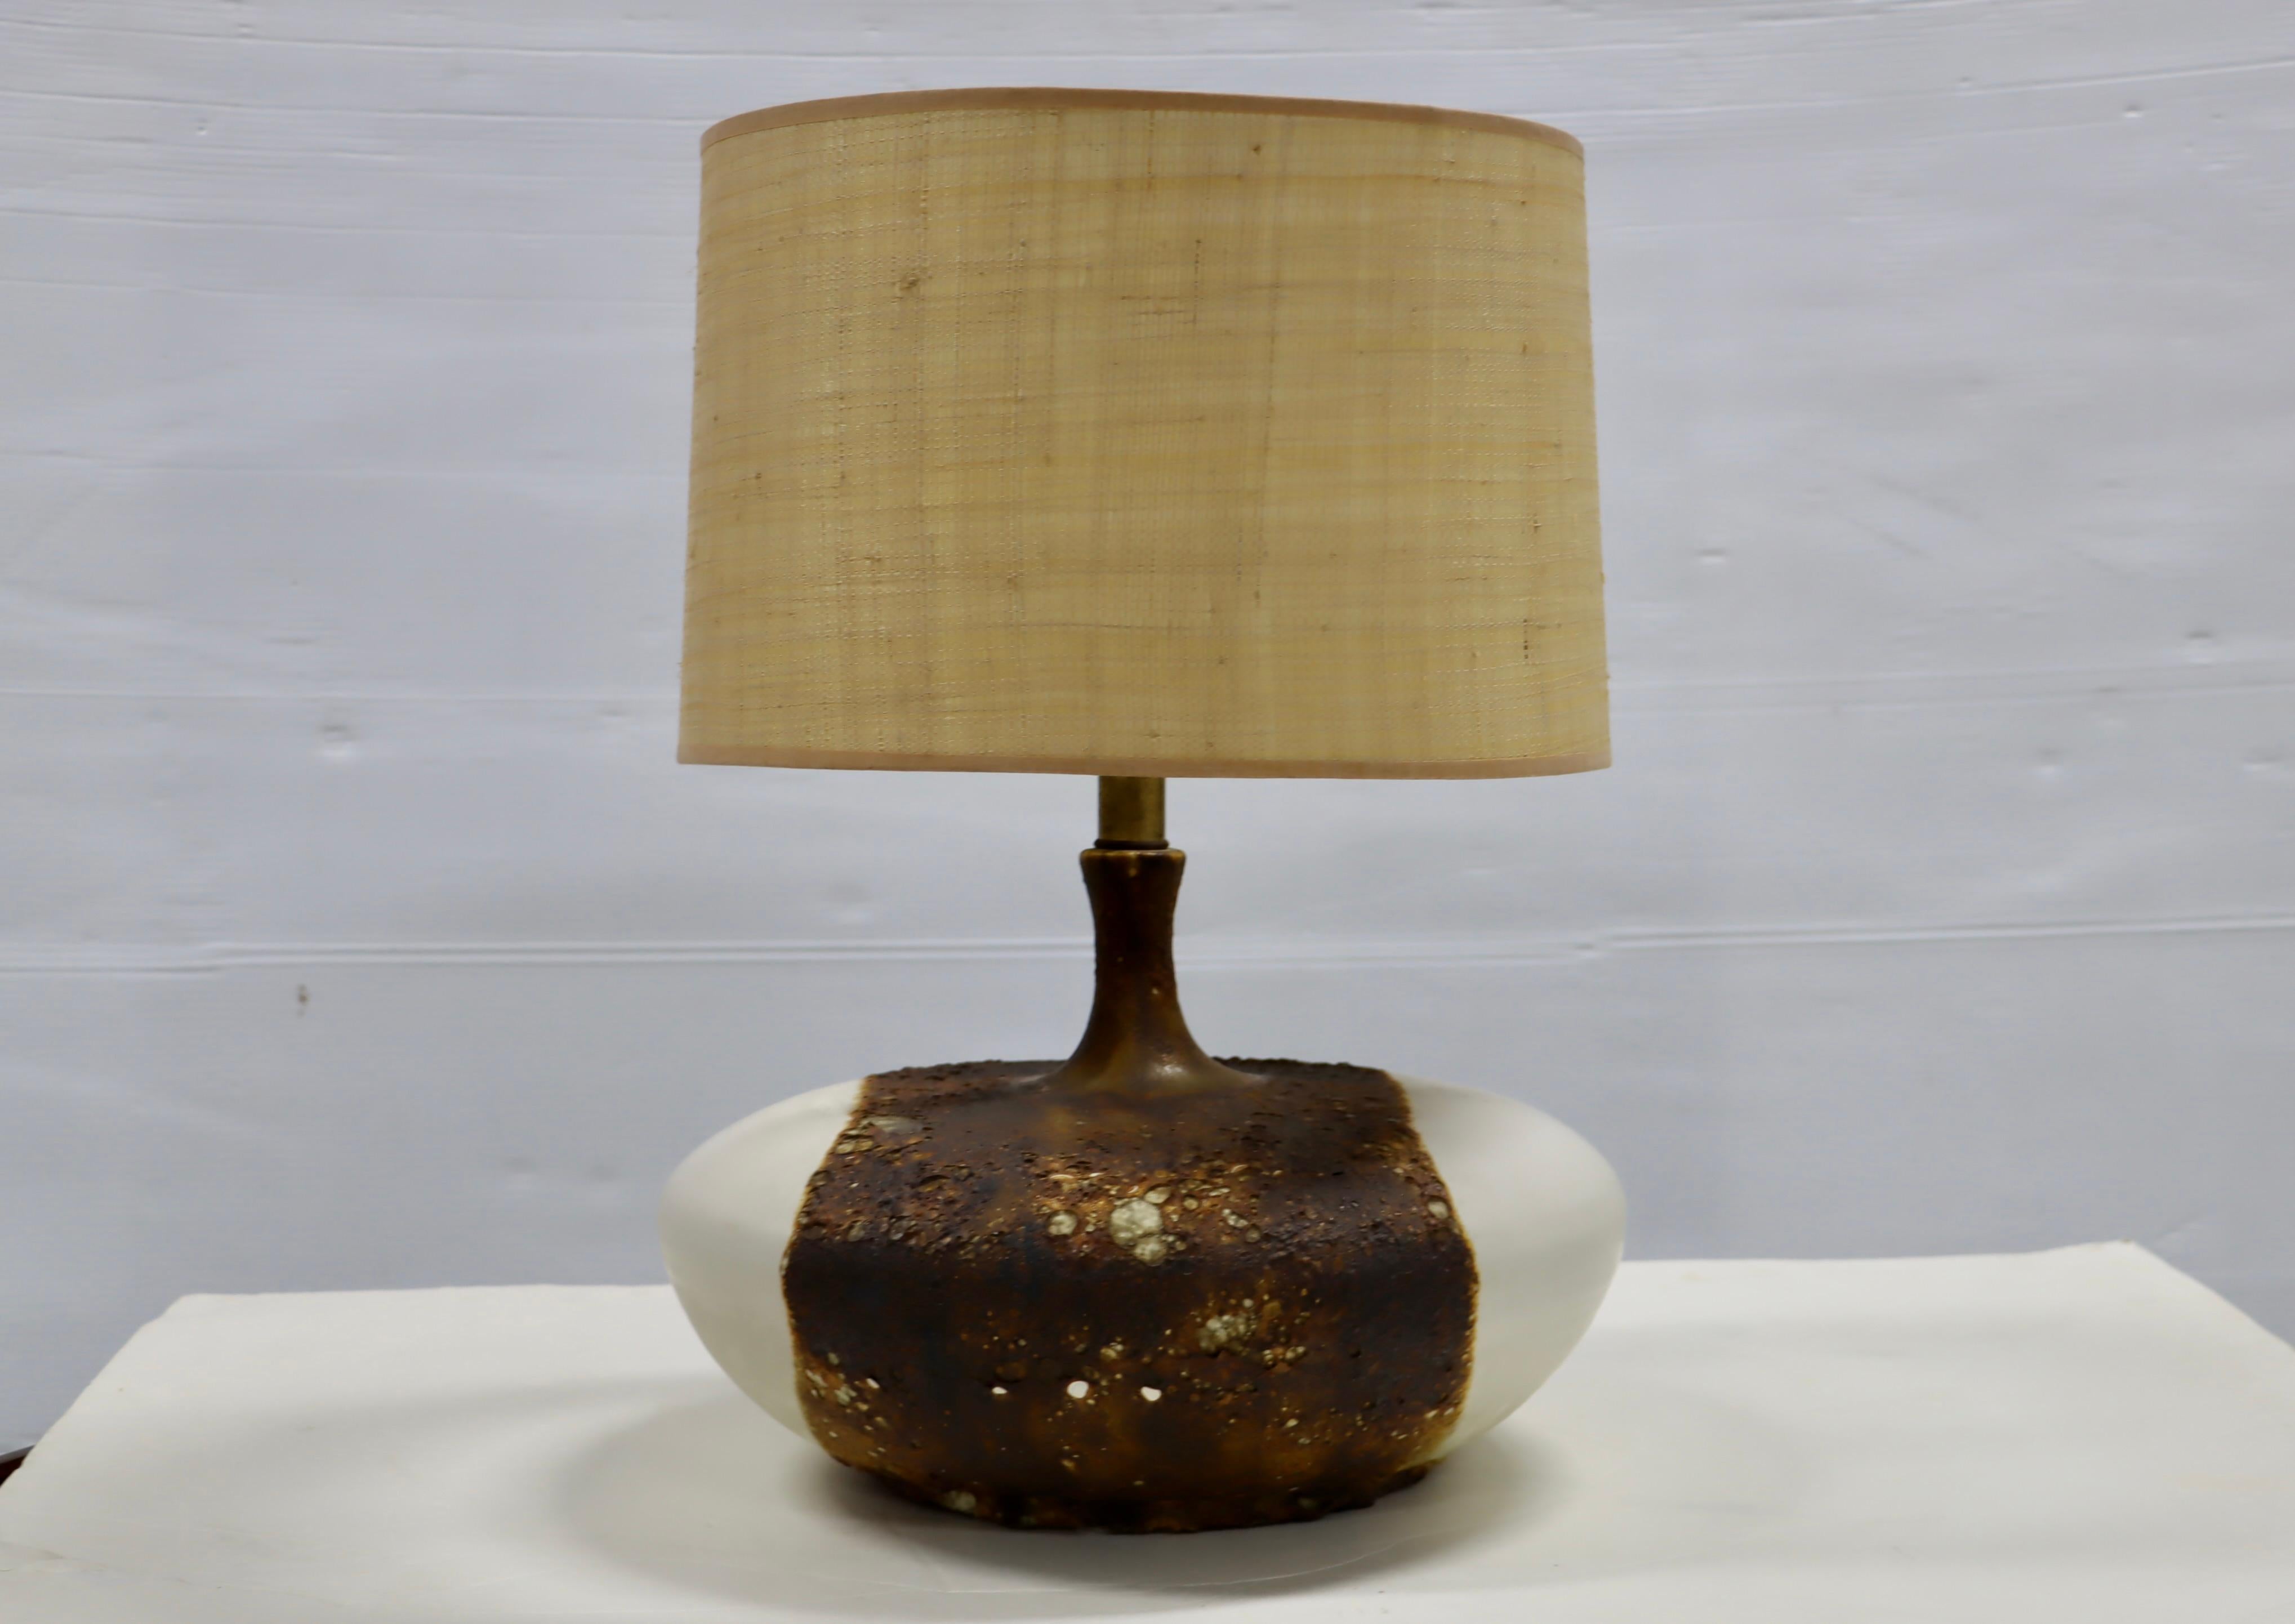 1960's mid-century modern volcanic lava glazed table lamp, in vintage original condition with some wear and patina due to age and use.